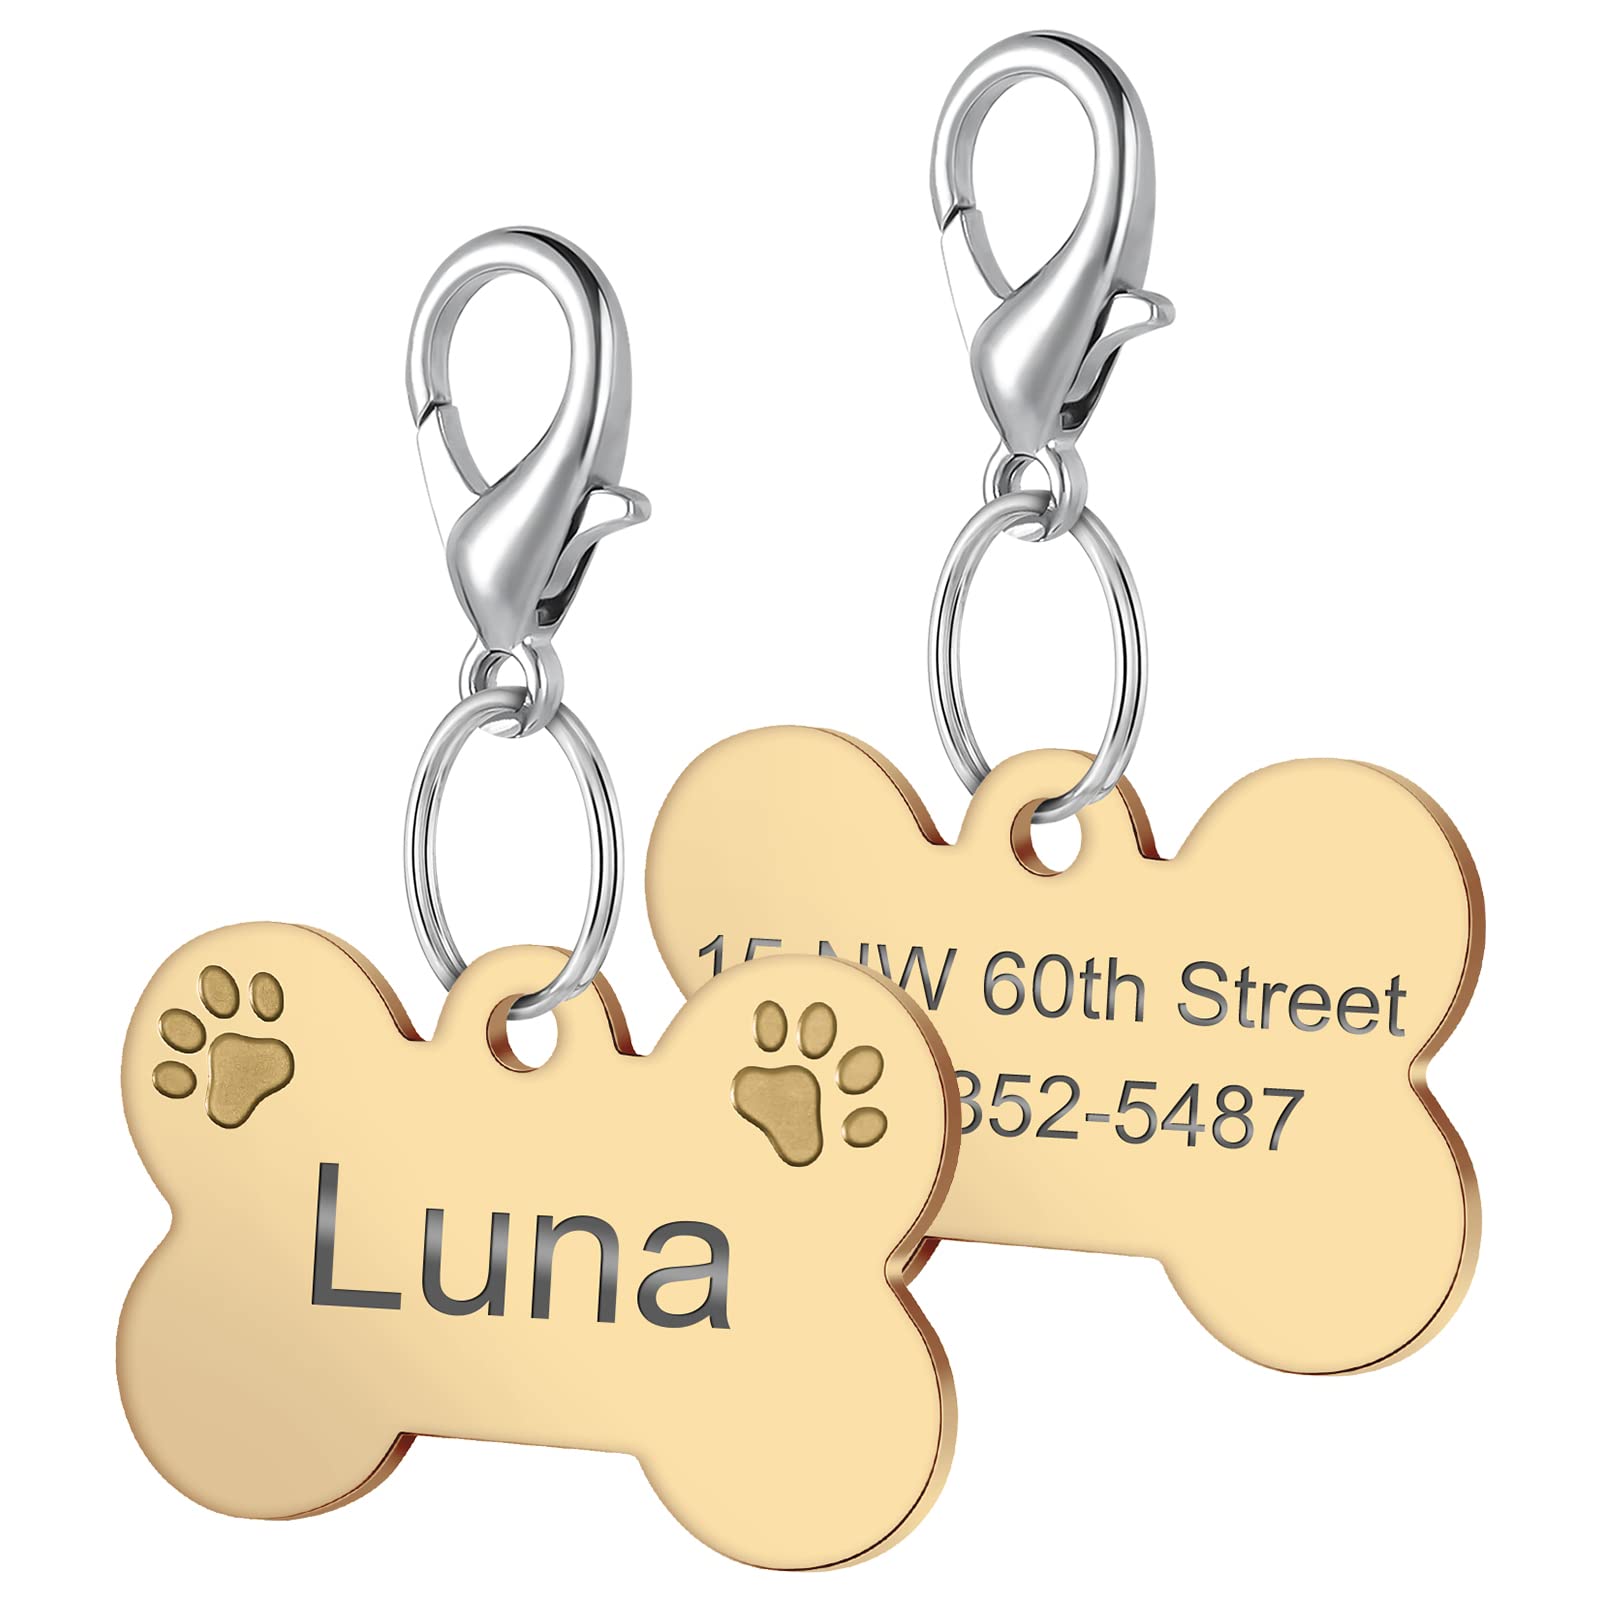 Bone and Paw Print Dog Tag in Stainless Steel